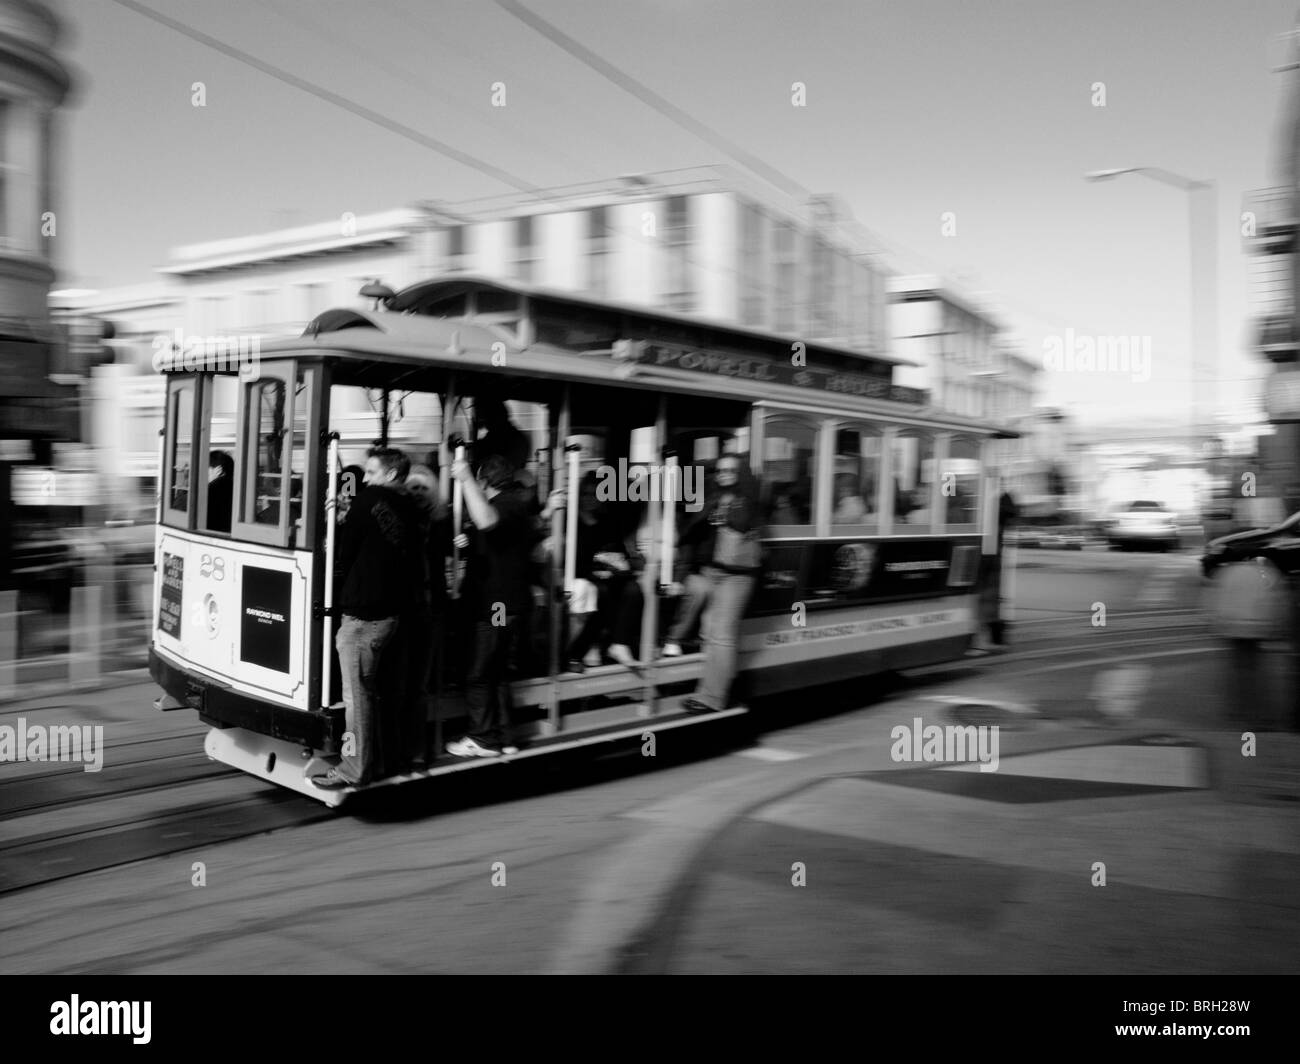 A tram on a street in San Francisco in California, United States Stock Photo